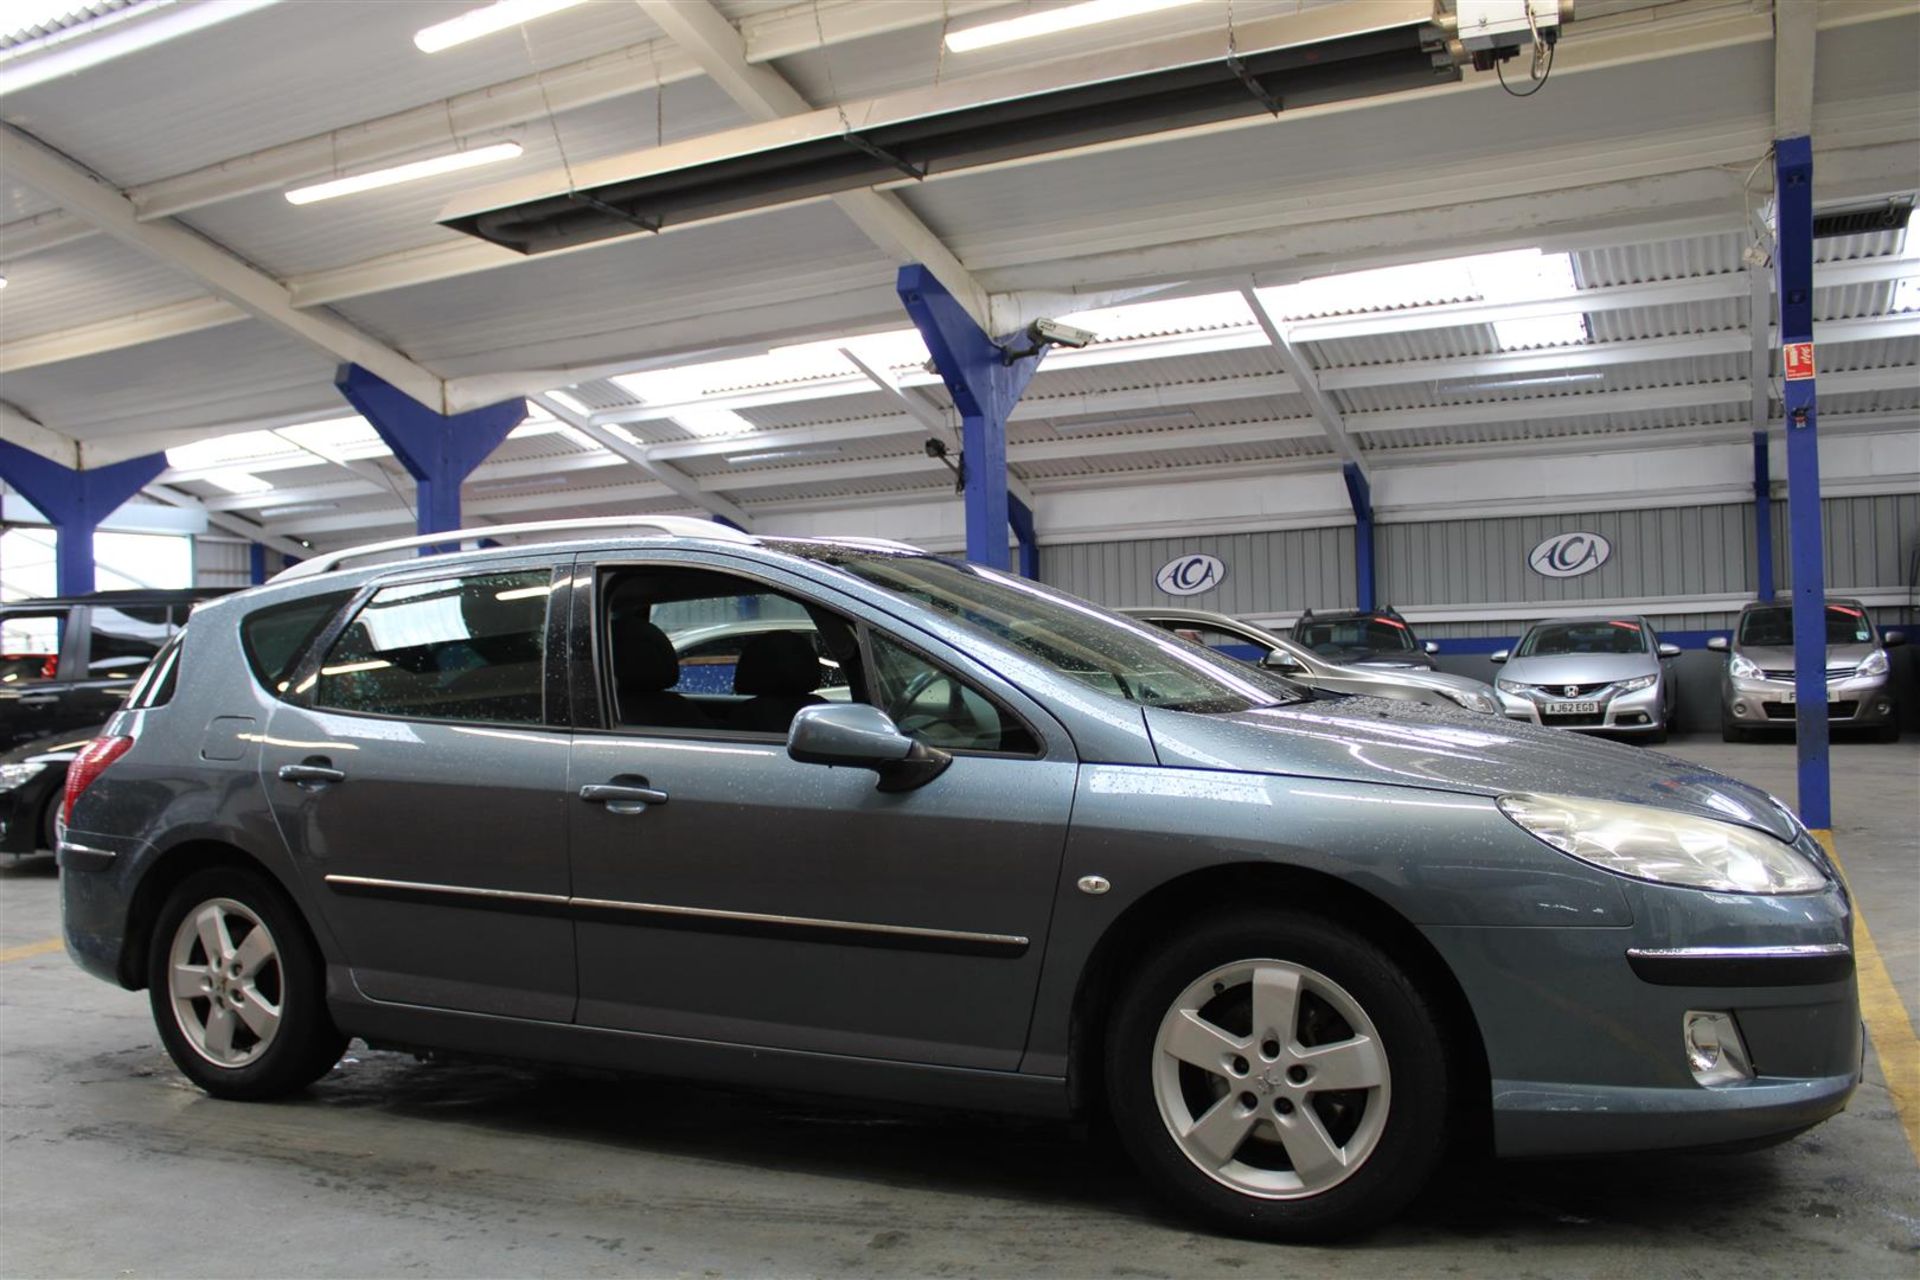 57 08 Peugeot 407 SW SE HDI - Image 23 of 32